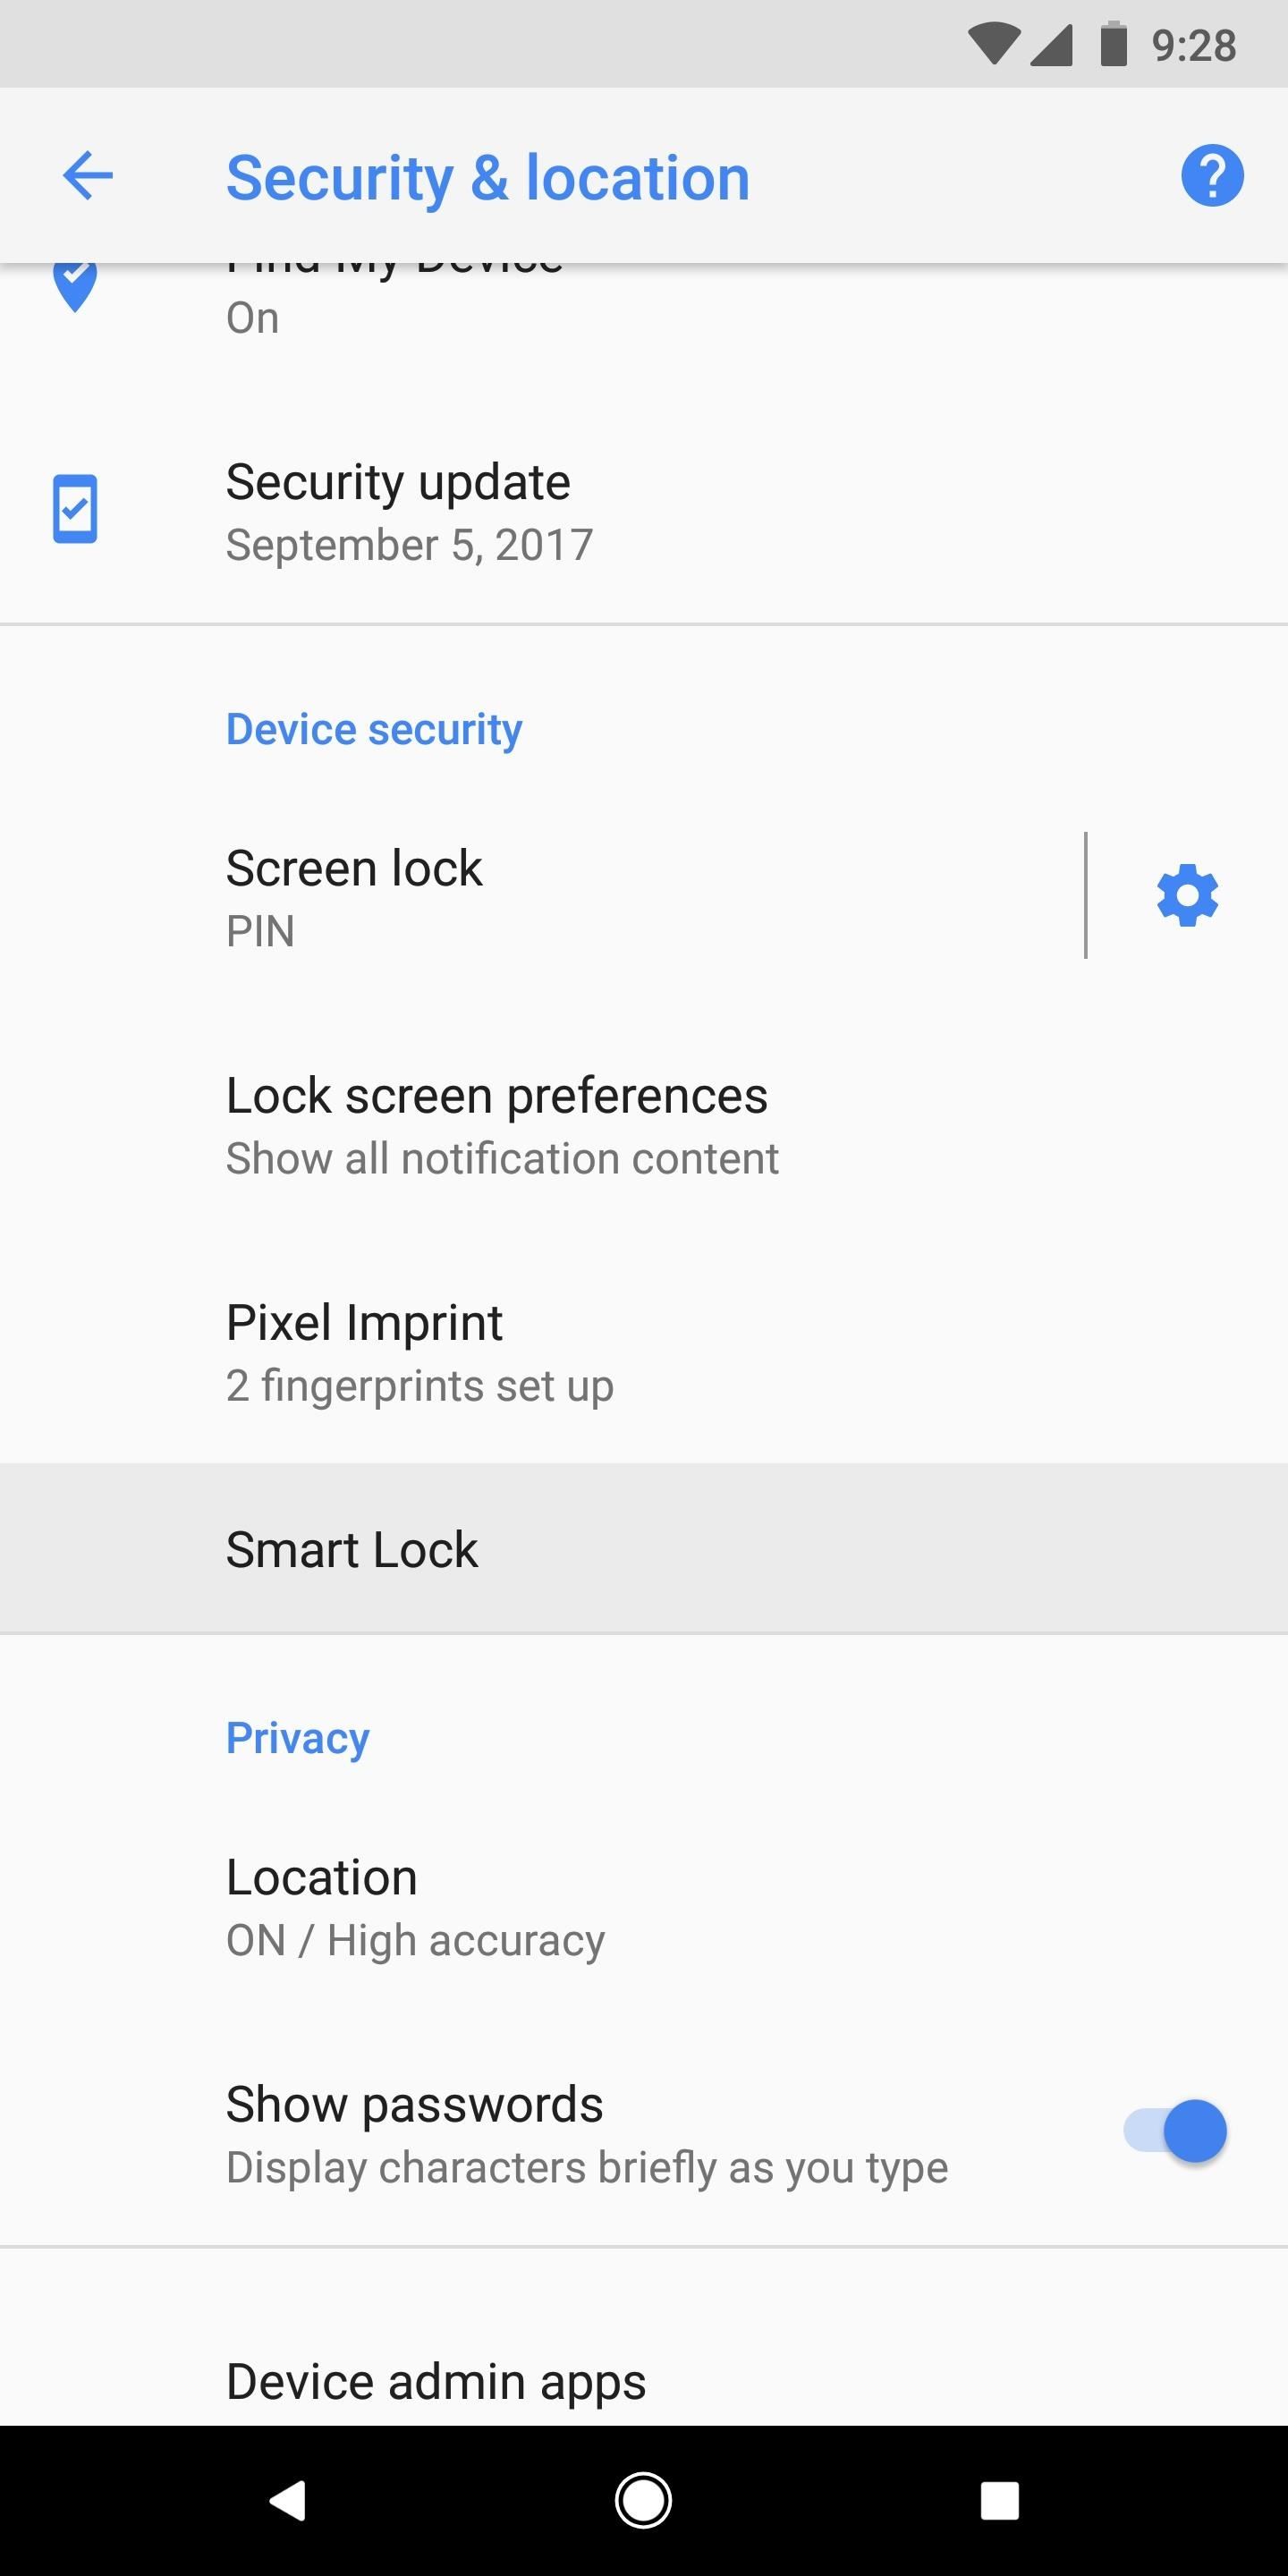 How to Get the OnePlus 5T's Face Unlock on Any Phone